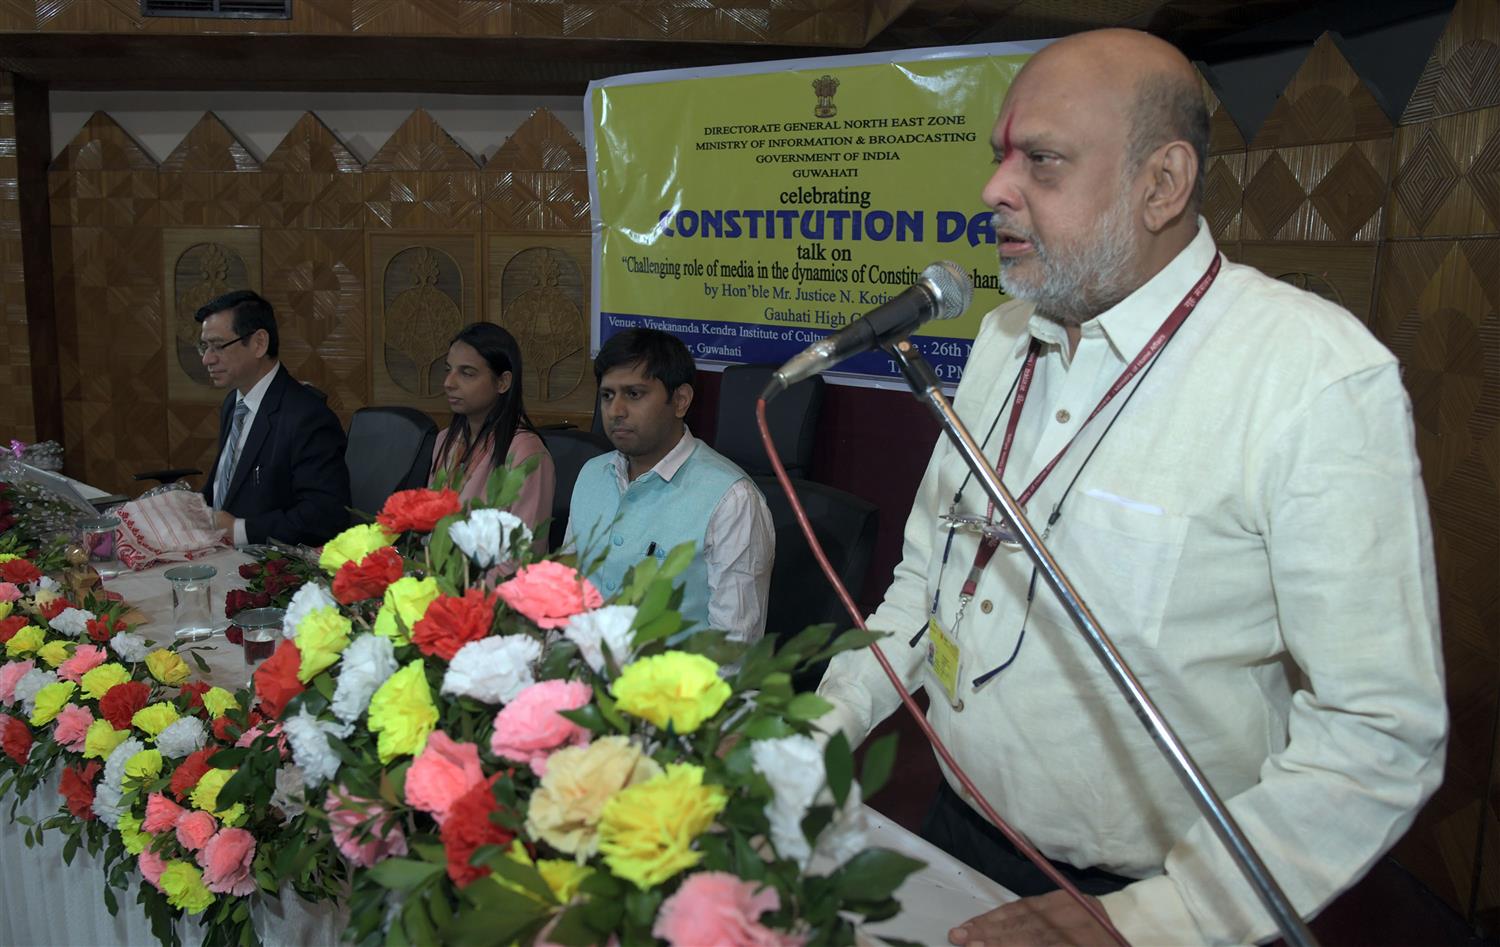 SHRI L R VISHWANATH, DIRECTOR GENERAL, MINISTRY OF INFORMATION & BROADCASTING DELIVERING WELCOME  SPEECH AT A FUNCTION  ORGANIZED ON THE OCCASION OF THE 70TH CONSTITUTION DAY “CHALLENGING ROLE OF MEDIA IN THE DYNAMICS OF CONSTITUTIONAL CHANGES IN INDIA” BY REGIONAL OUTREACH BUREAU MINISTRY OF INFORMATION &  BROADCASTING,RGUWAHATI ON 26TH NOVEMBER 2019 AT GUWAHATI. JUSTICE GUWAHATI HIGH COURT SHRI KOTISWAR SINGH, SMT. KEERTI TEWARI,  JOINT DIRECTOR,PIB GUWAHATI AND DR. A. M FAROOQI, DEPUTY DIRECTOR, ROB GUWAHATI ARE ALSO SEEN IN THE PICTURE.